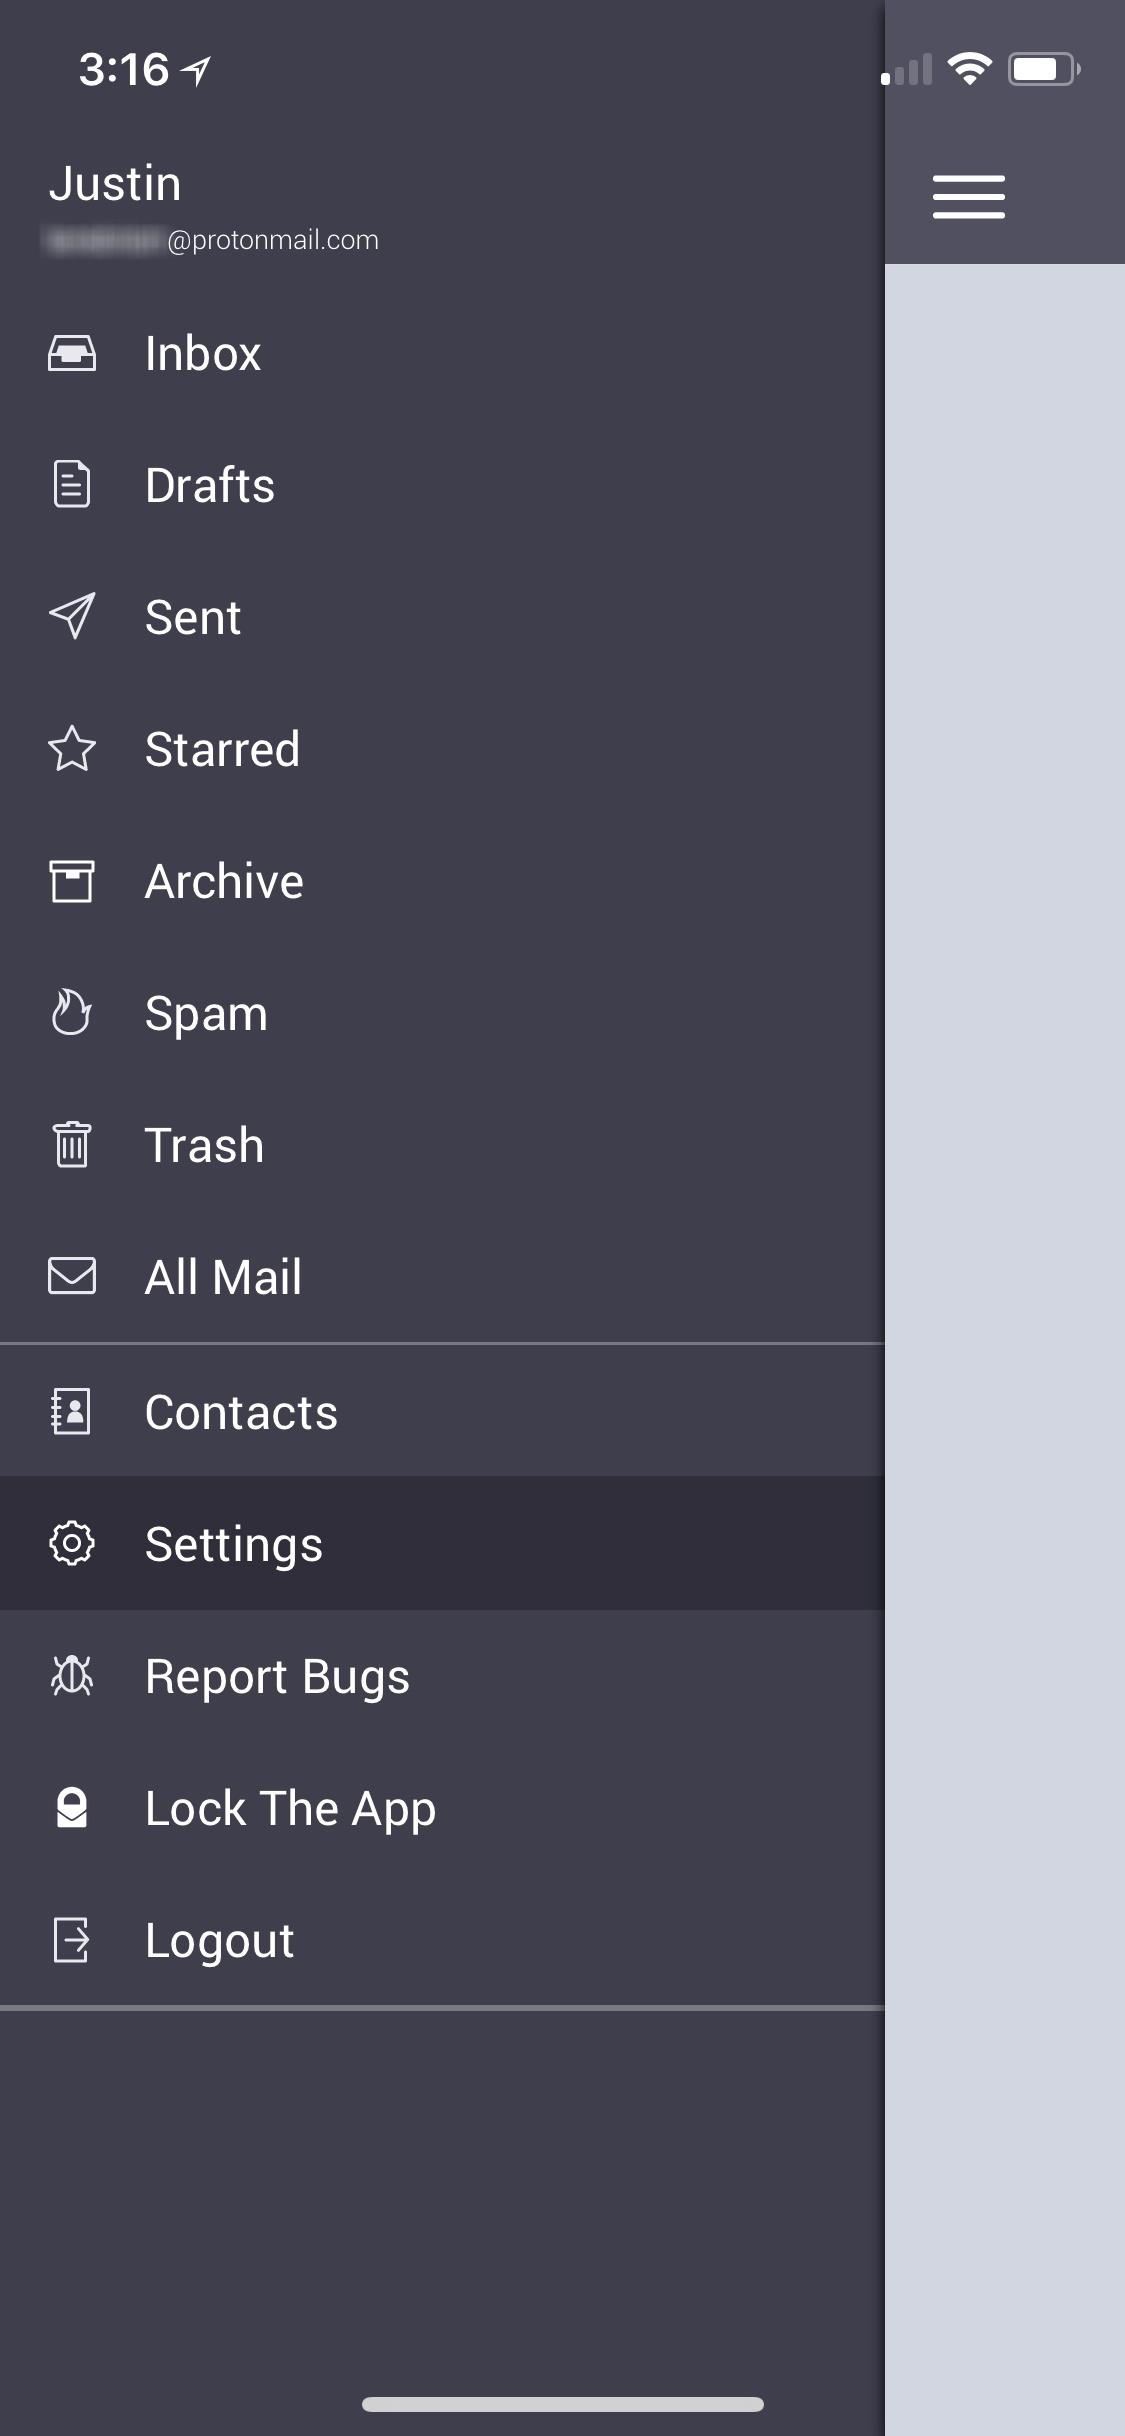 ProtonMail 101: How to Make Images Show Up in Your Emails Automatically